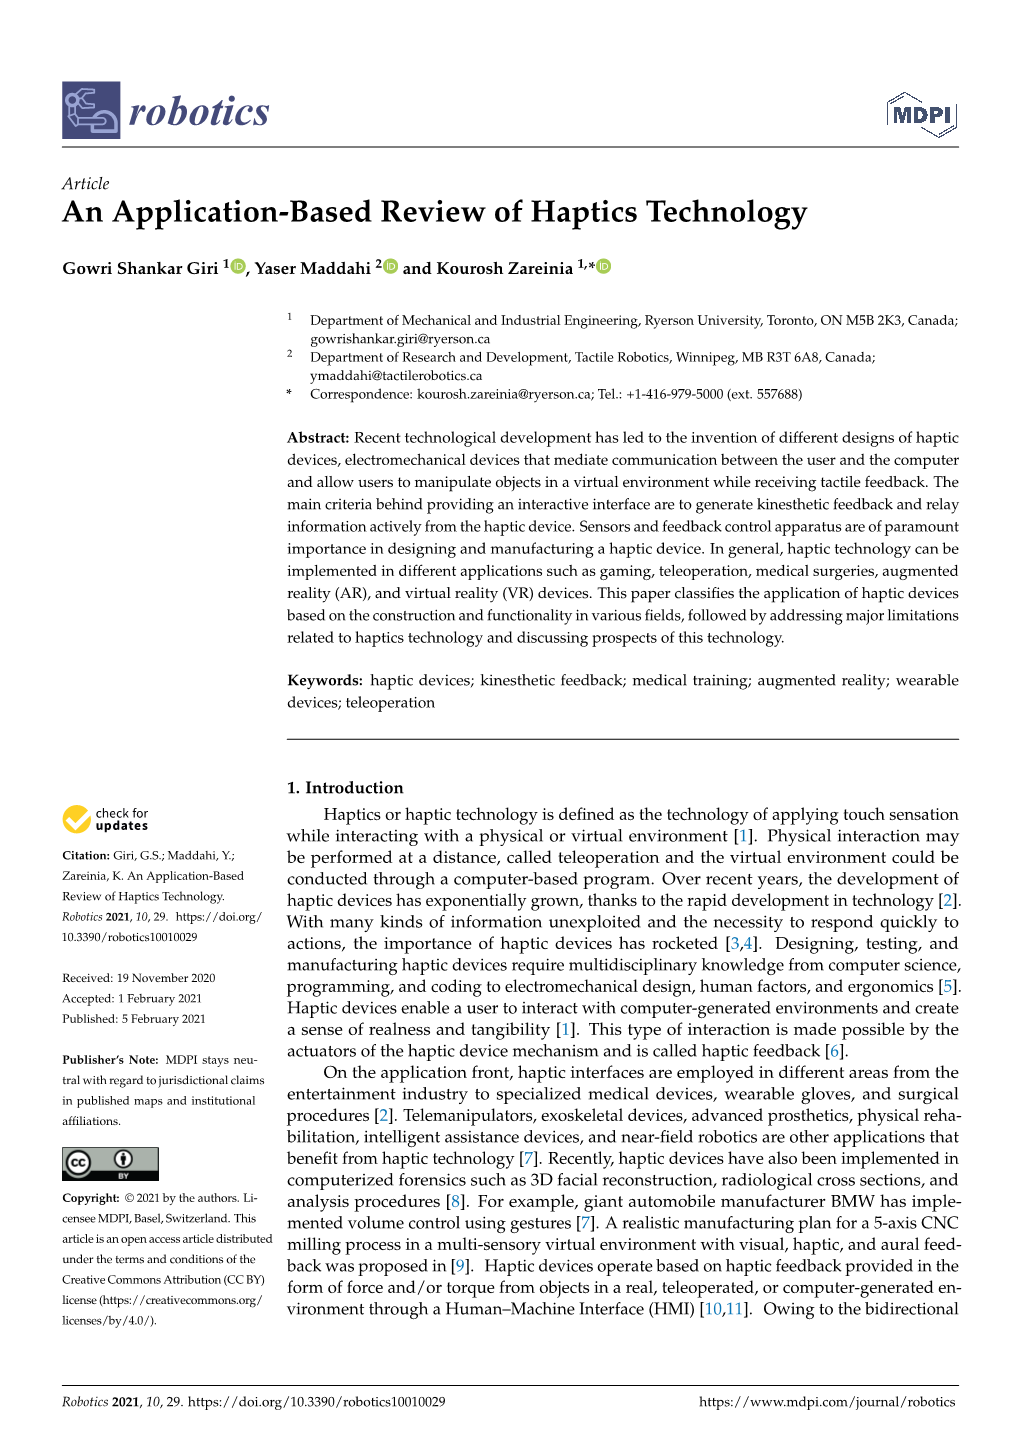 An Application-Based Review of Haptics Technology